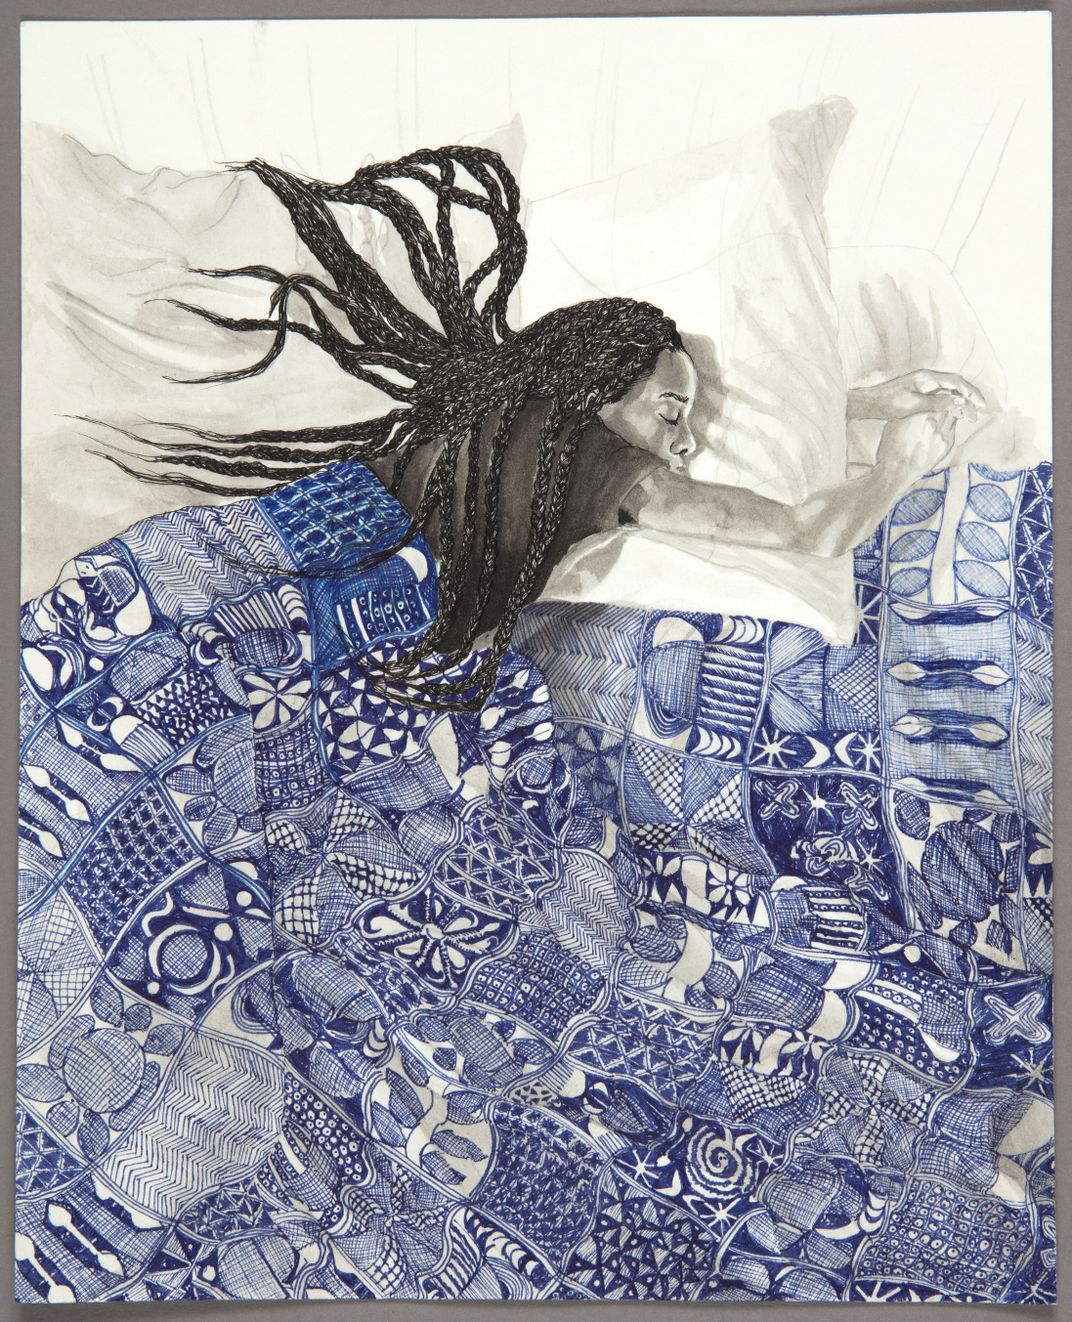 An artworks featuring a grayscale young girl with long braids sleeping in a bed, with an indigo quilt over top of her